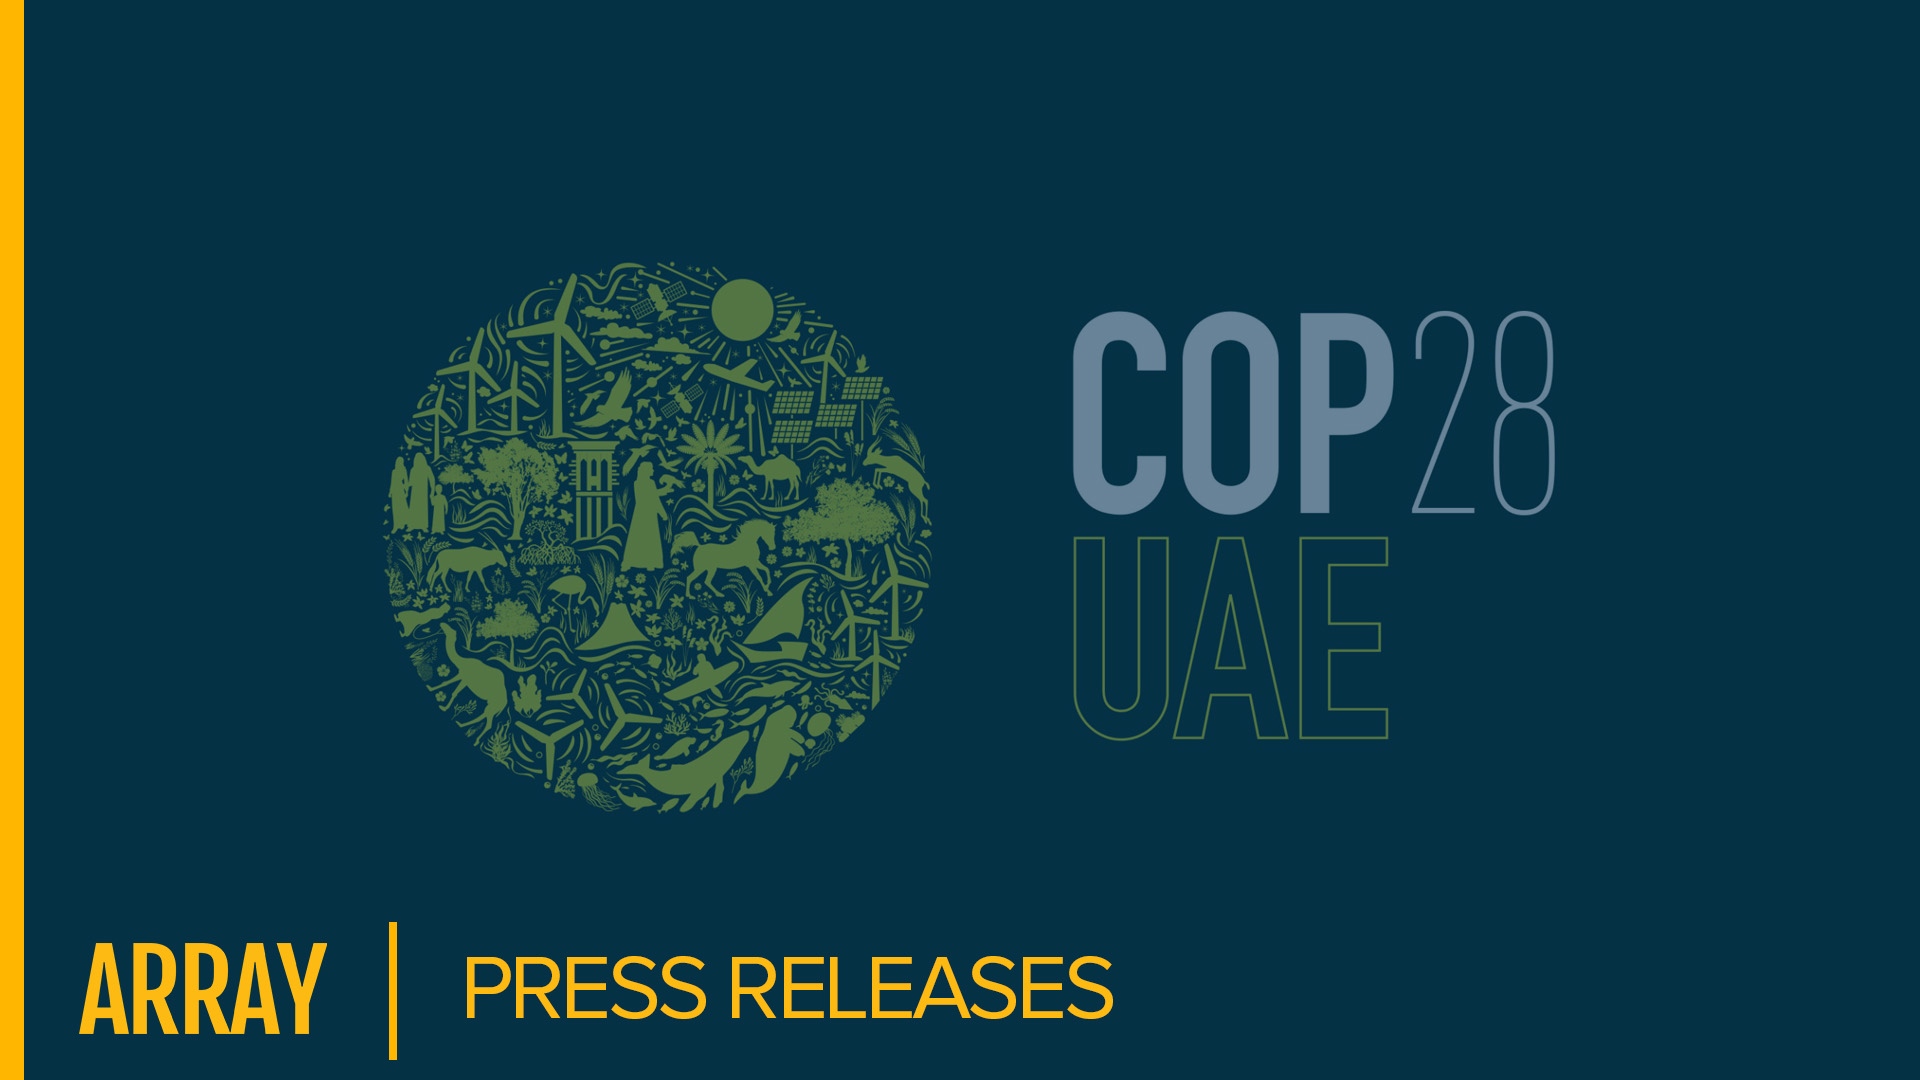 The 28th United Nations Climate Change Conference (COP 28) should prominently feature the decisive role of solar energy in the path to energy transition